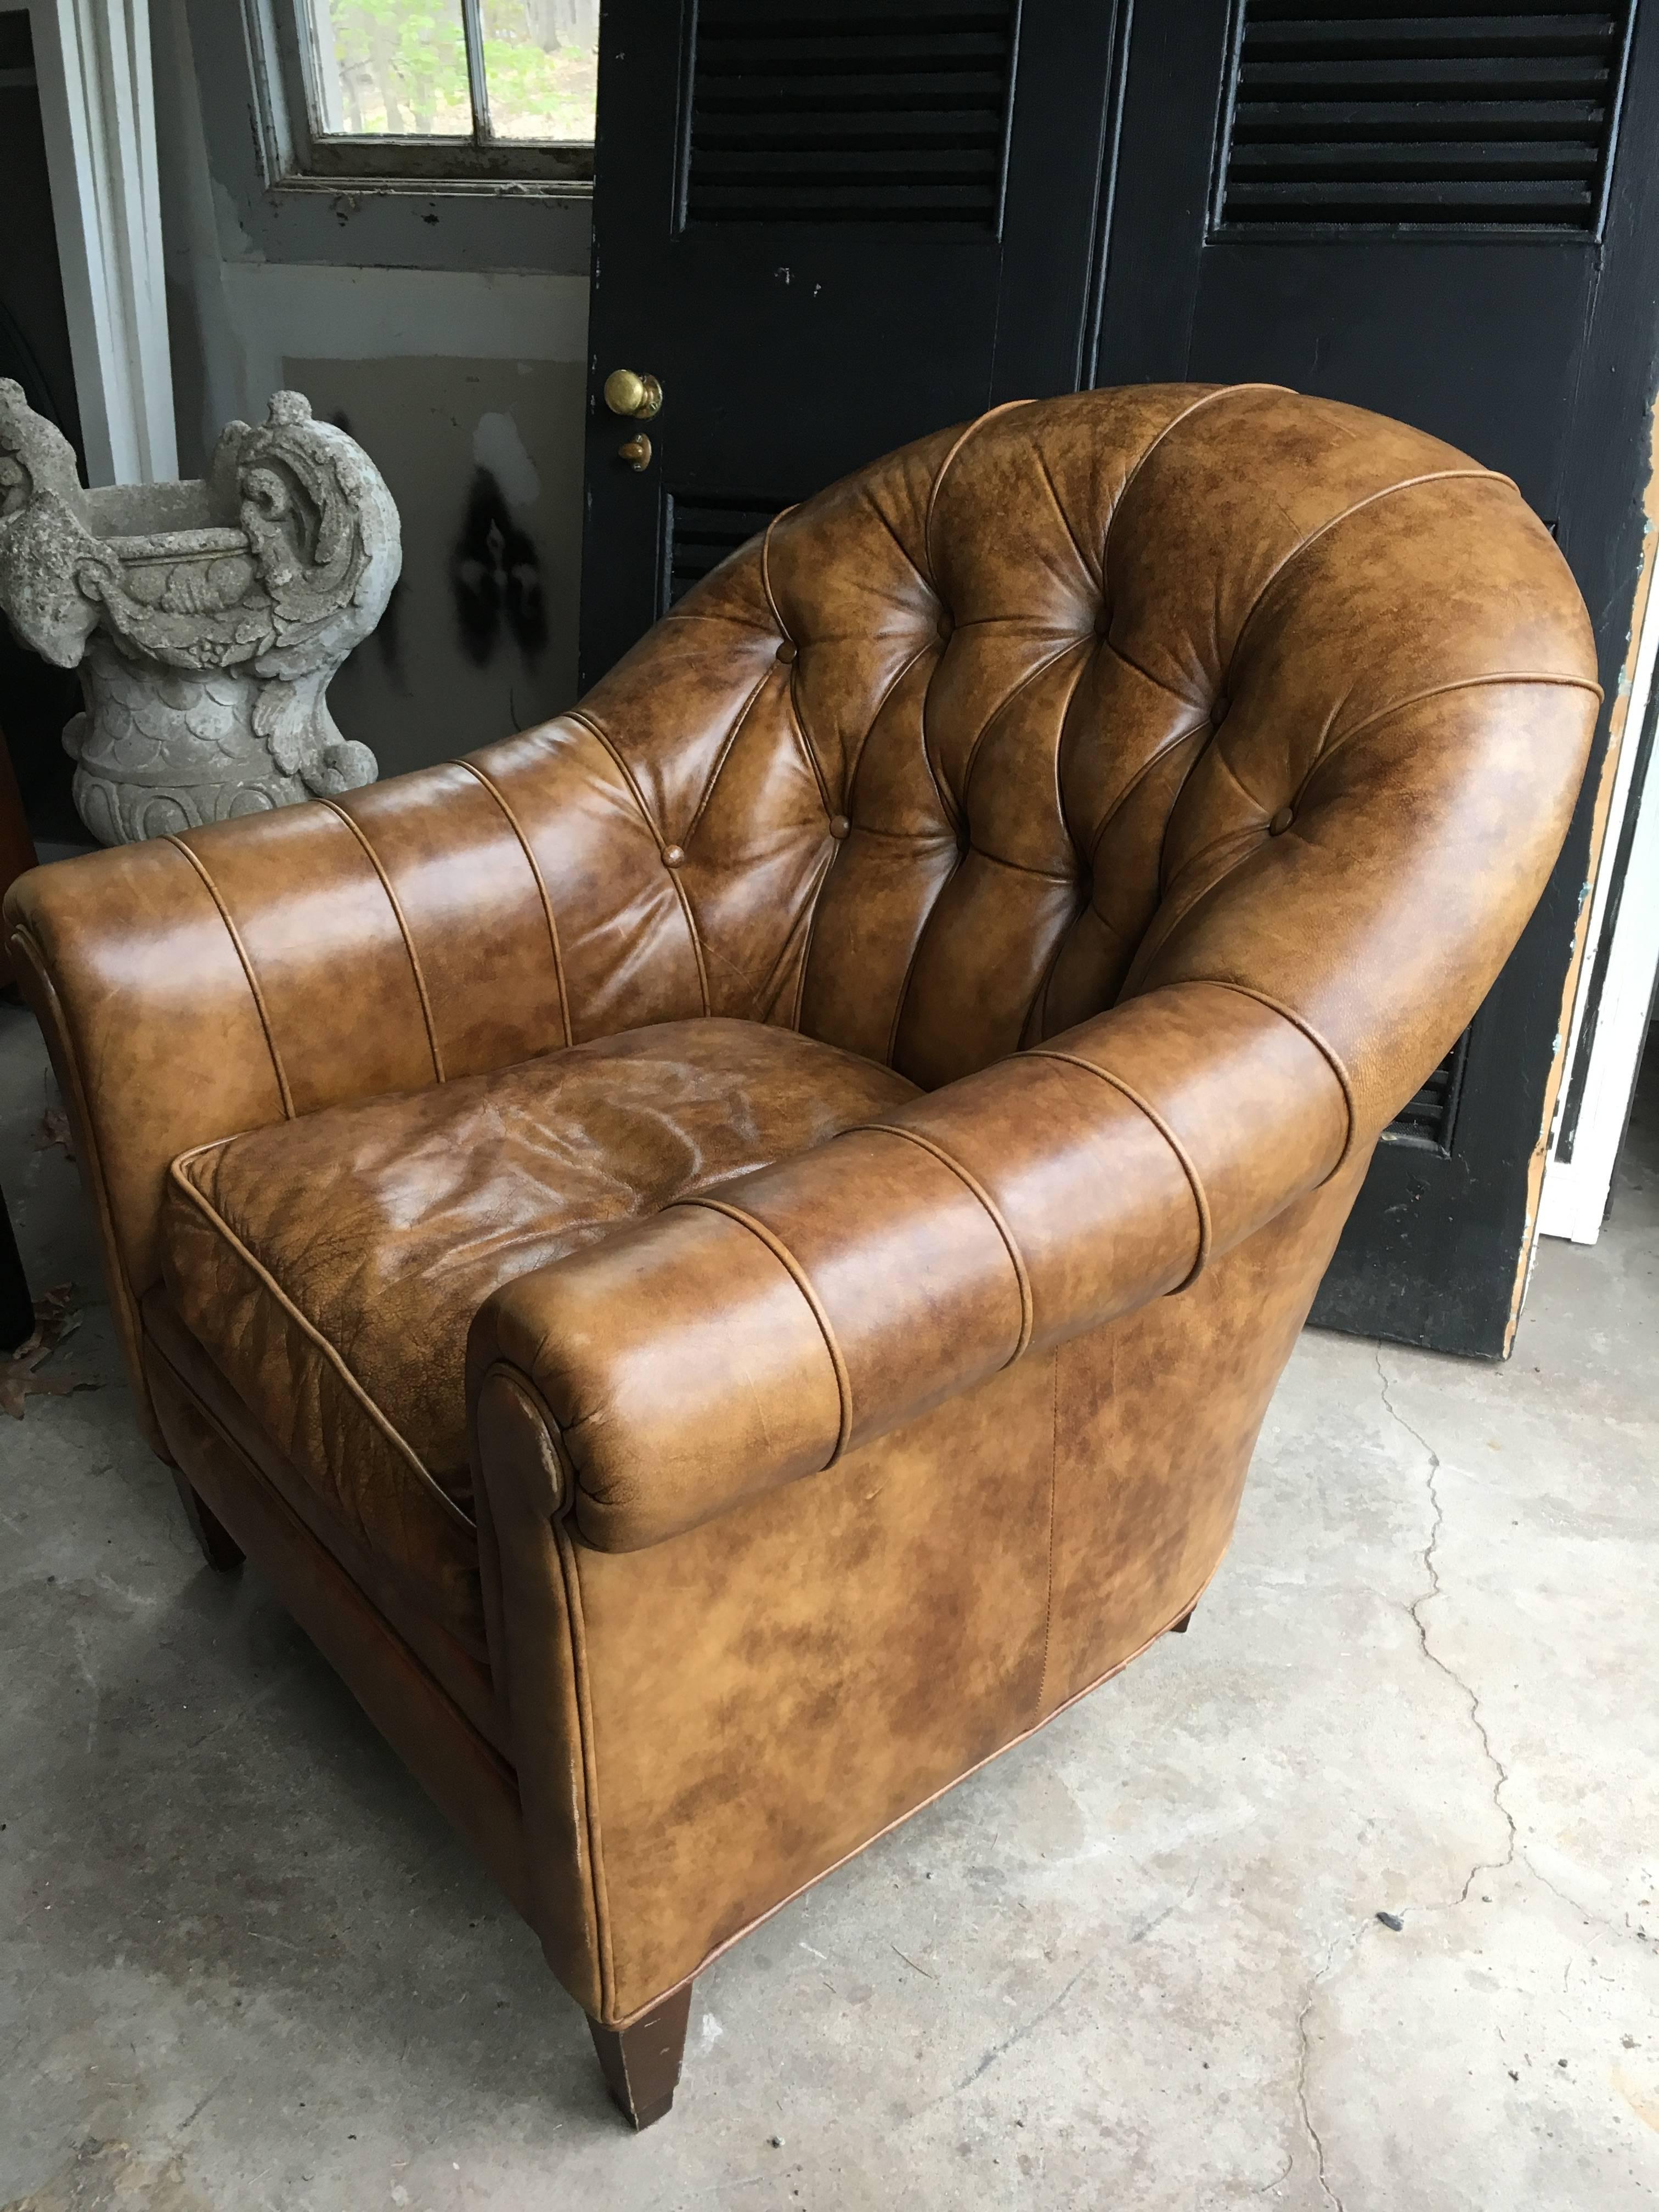 Sophisticated and handsome leather club chair in a wonderful shade of camel with brown undertones. Tufted back and one loose cushion. Tags under cushion. Seat height is 18